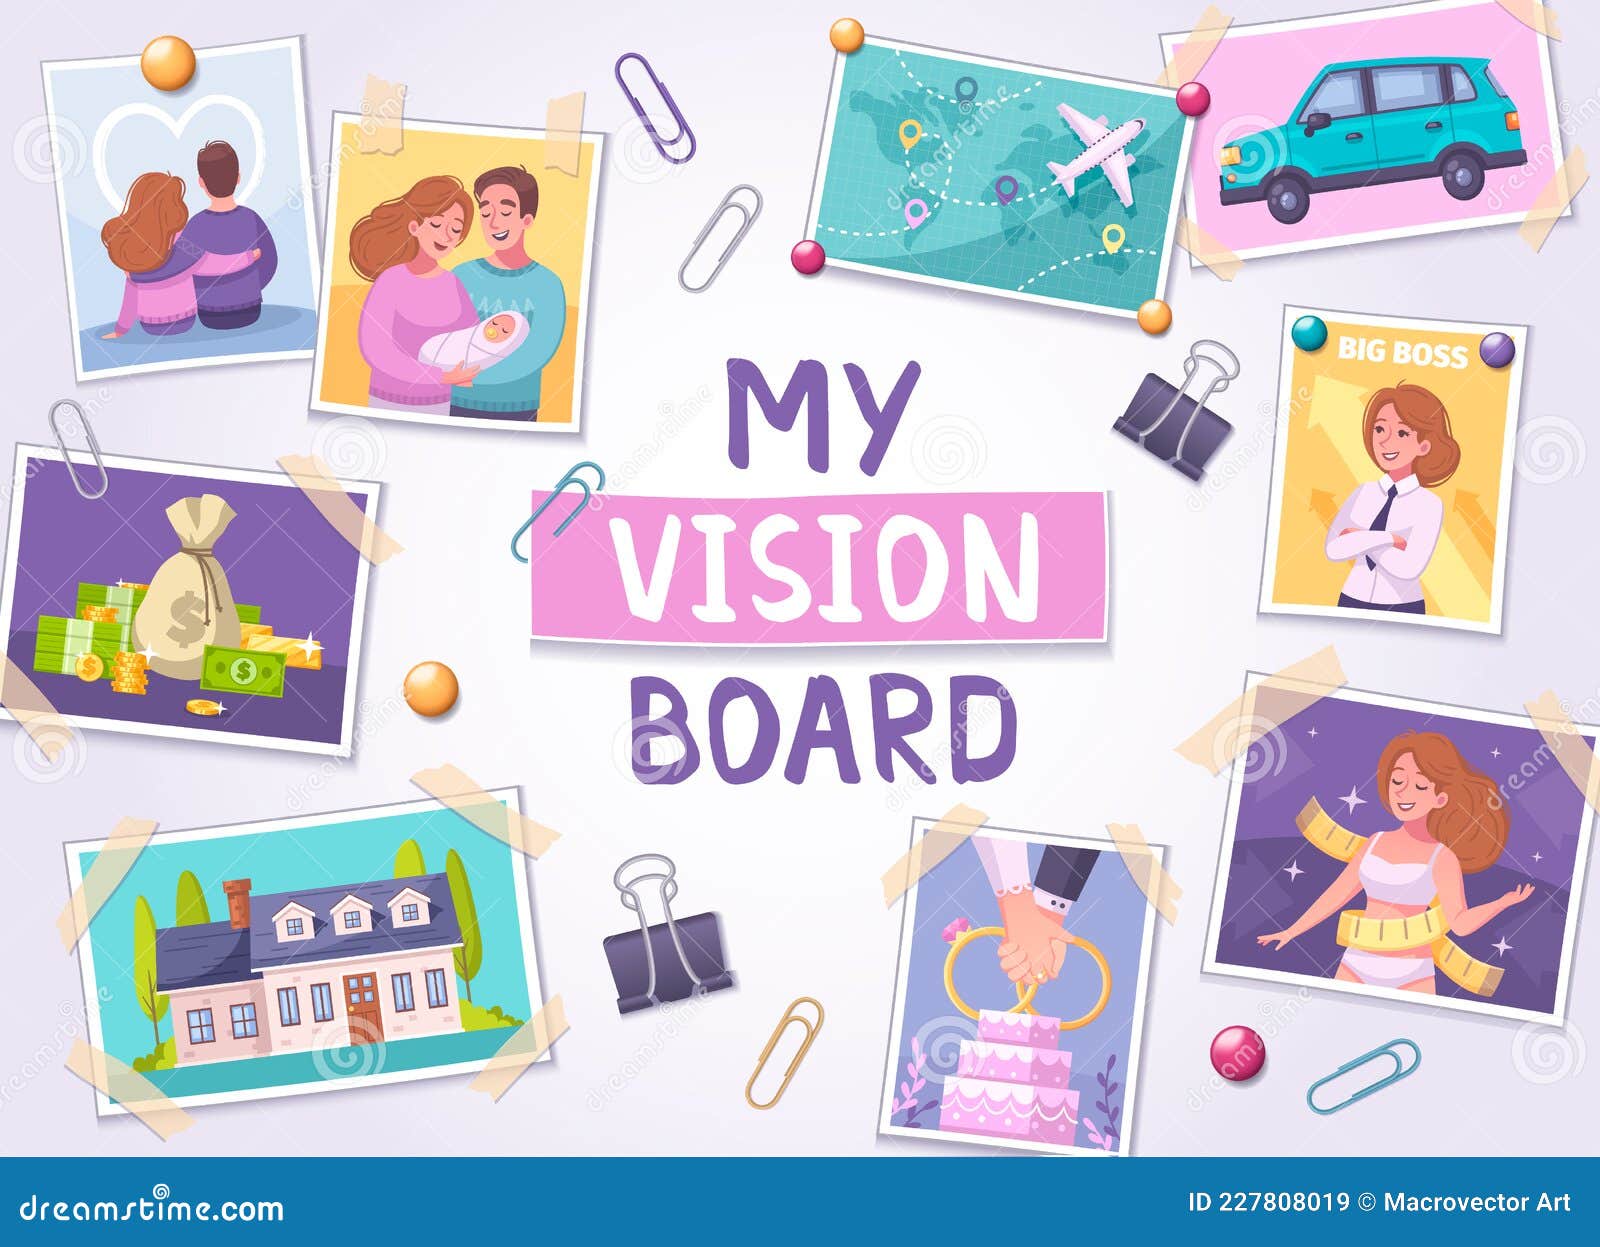 Vision Board Poster stock vector. Illustration of family - 227808019